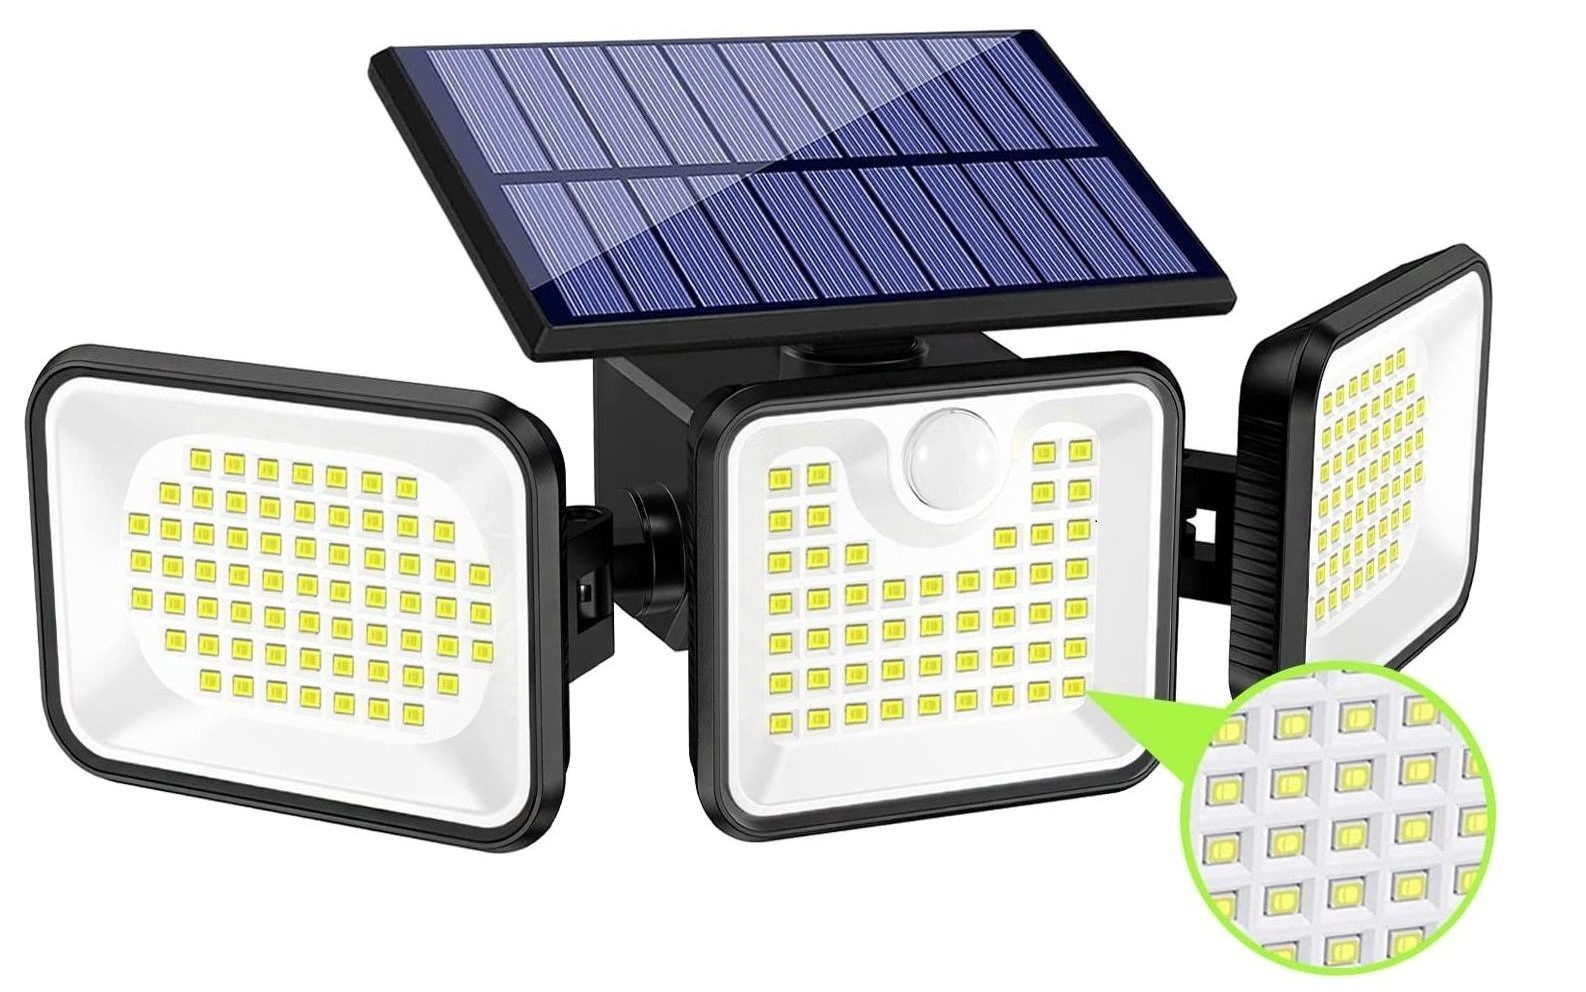 Solar Light Outdoor IP65 Waterproof 2 Pack 3 Adjustable Heads 270° Wide Angle Outdoor Flood Light for Garage Porch Garden Yard LED Security Light with Motion PIR Sensor with 210 LED 2500LM 